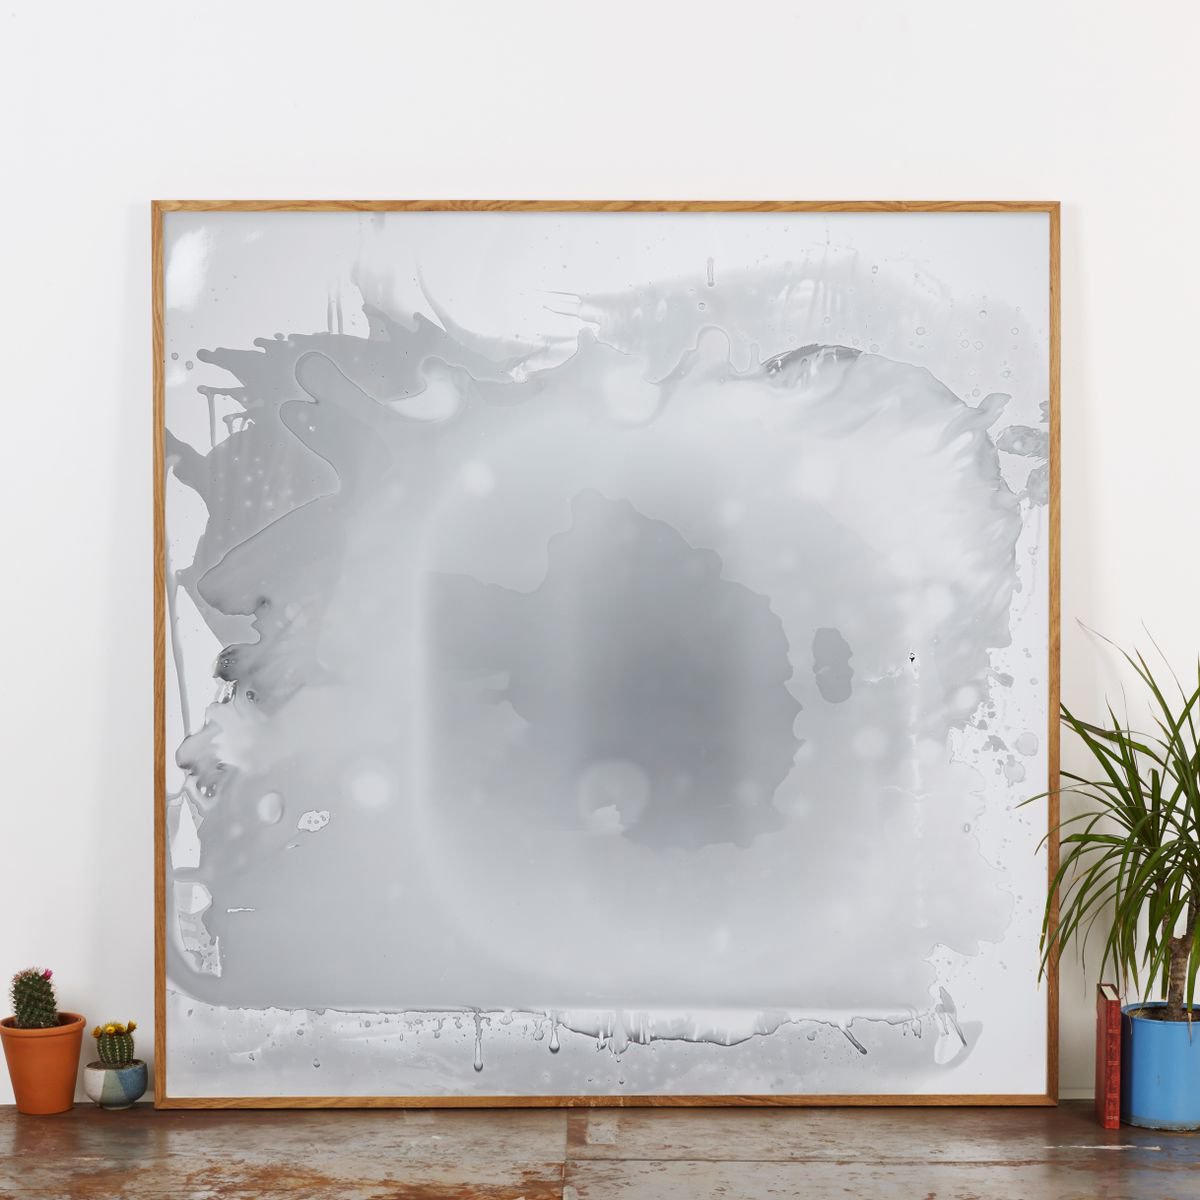 Abstract Black And White, Original Art, Painting, Wall Art, Darkroom Photography by Daniel Gregory